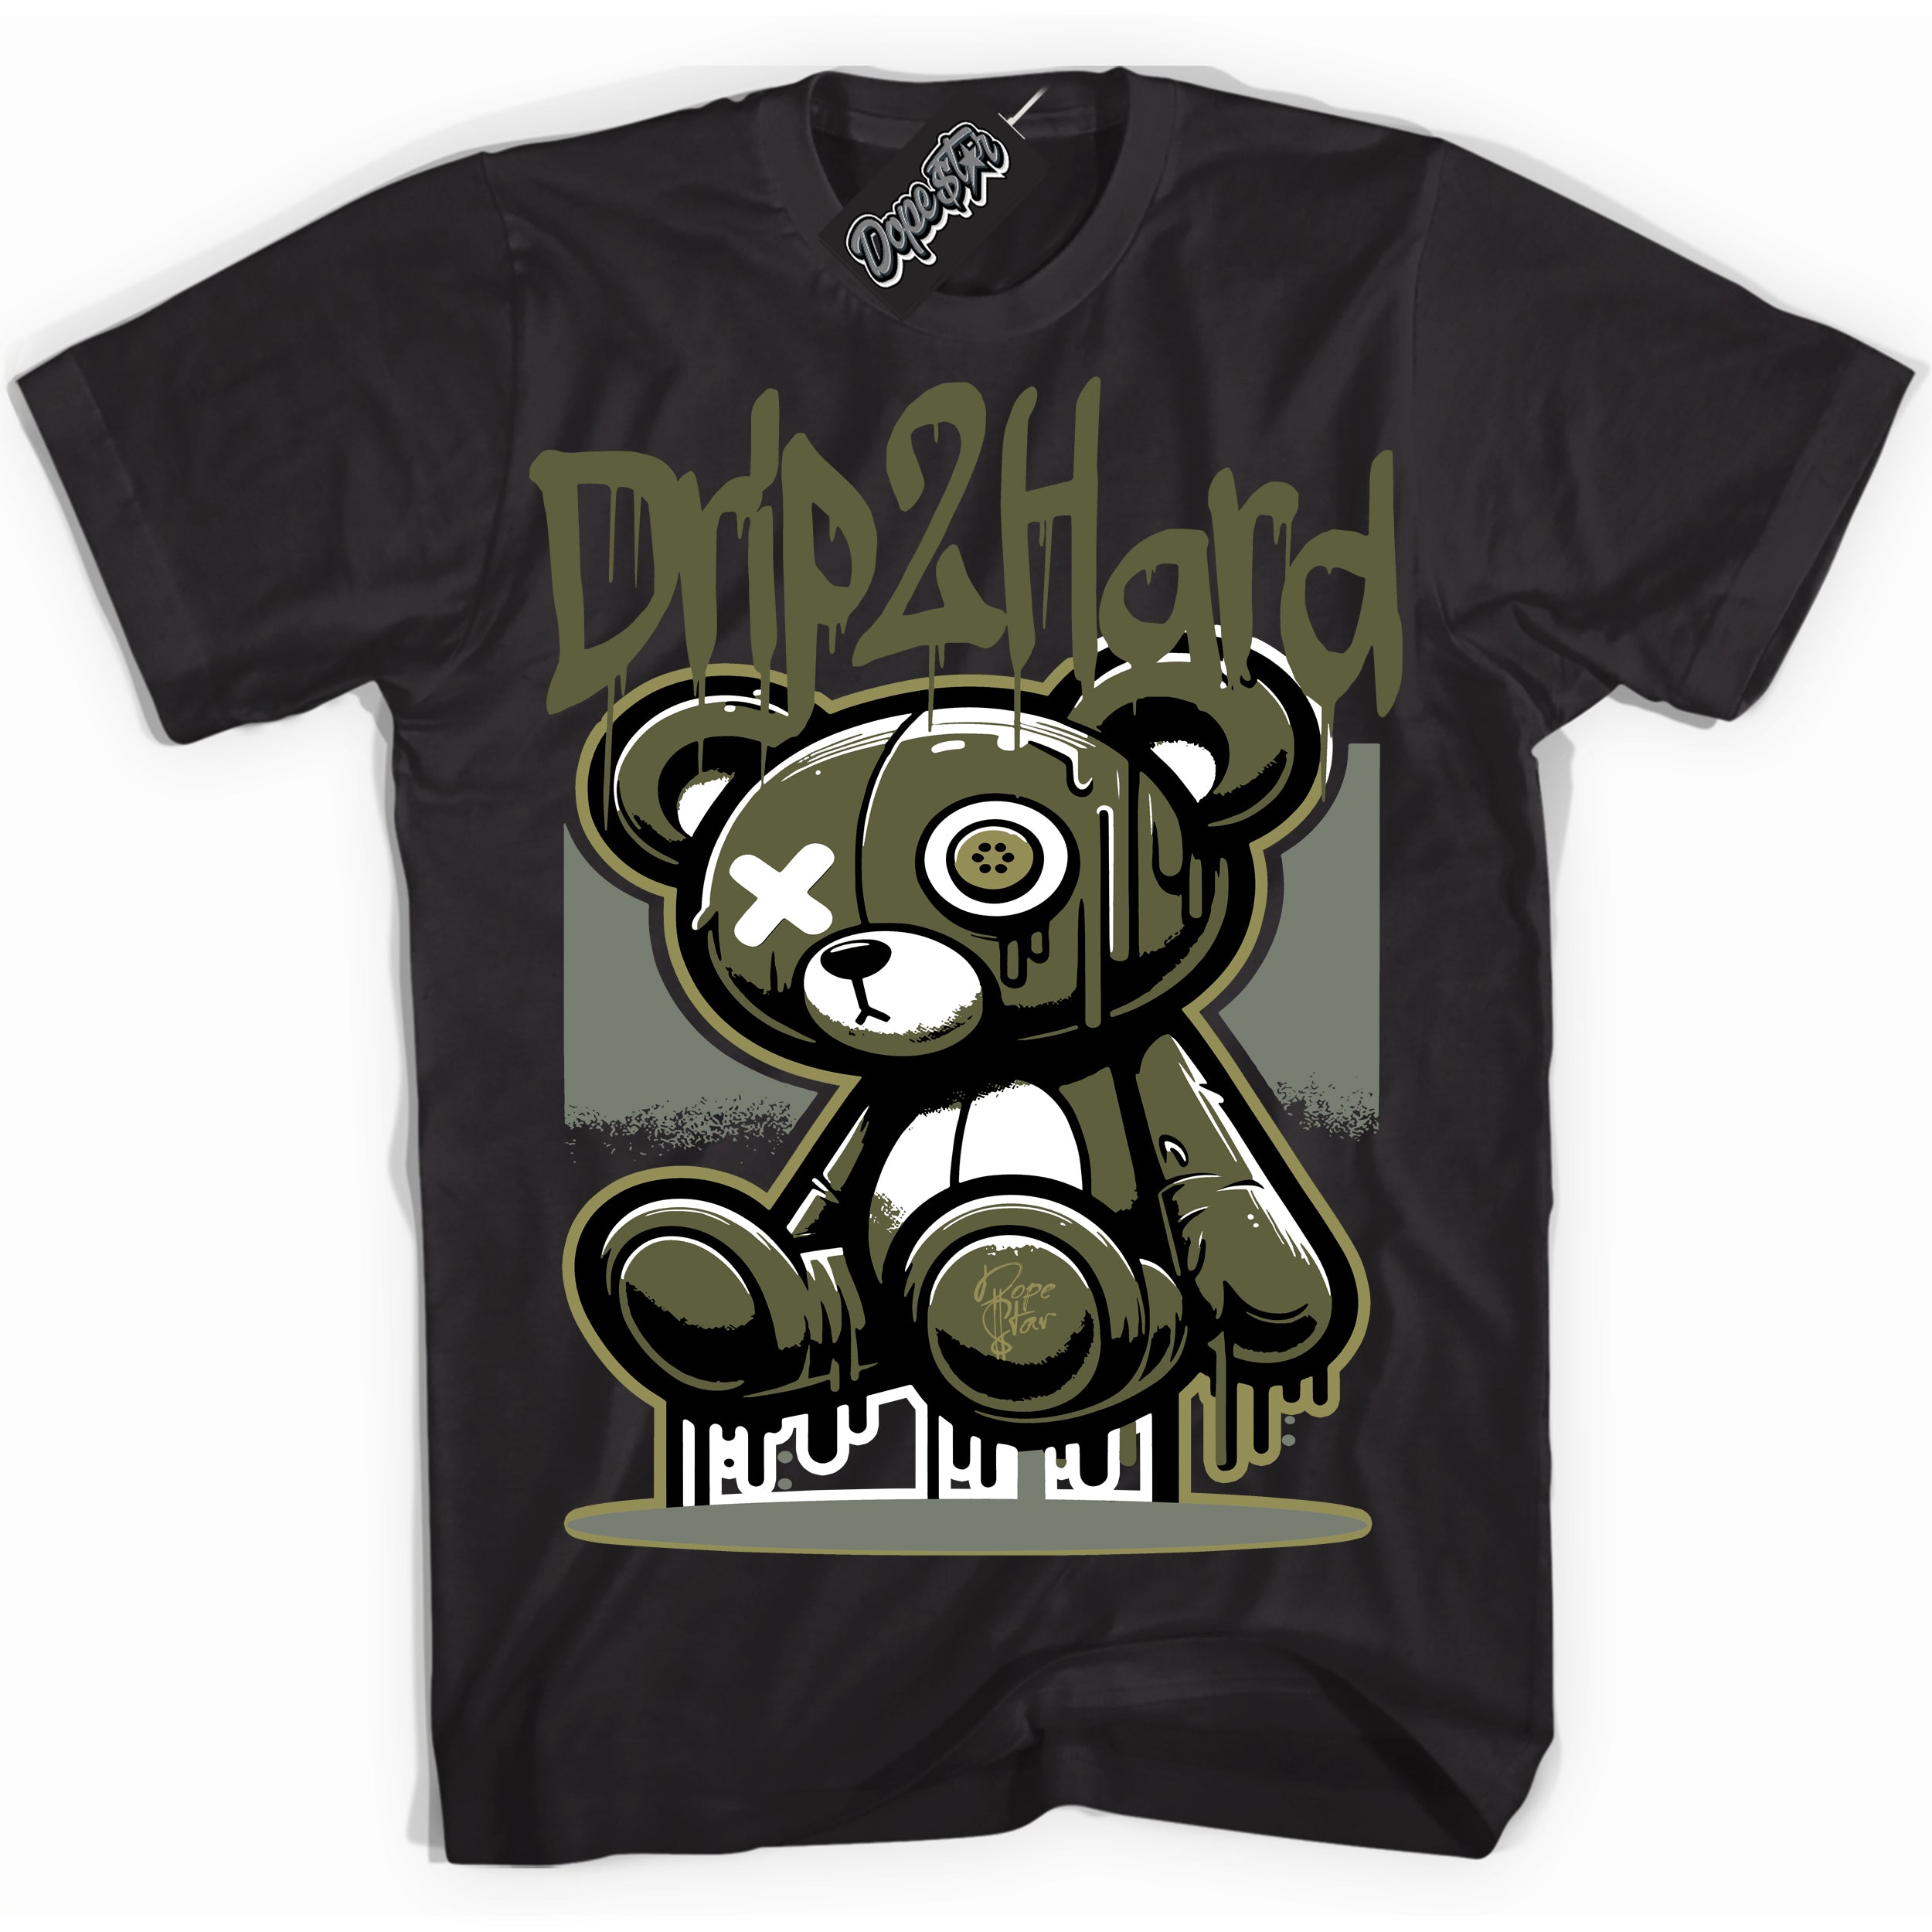 Cool Black graphic tee with “ Drip 2 Hard ” print, that perfectly matches Craft Olive 4s sneakers 